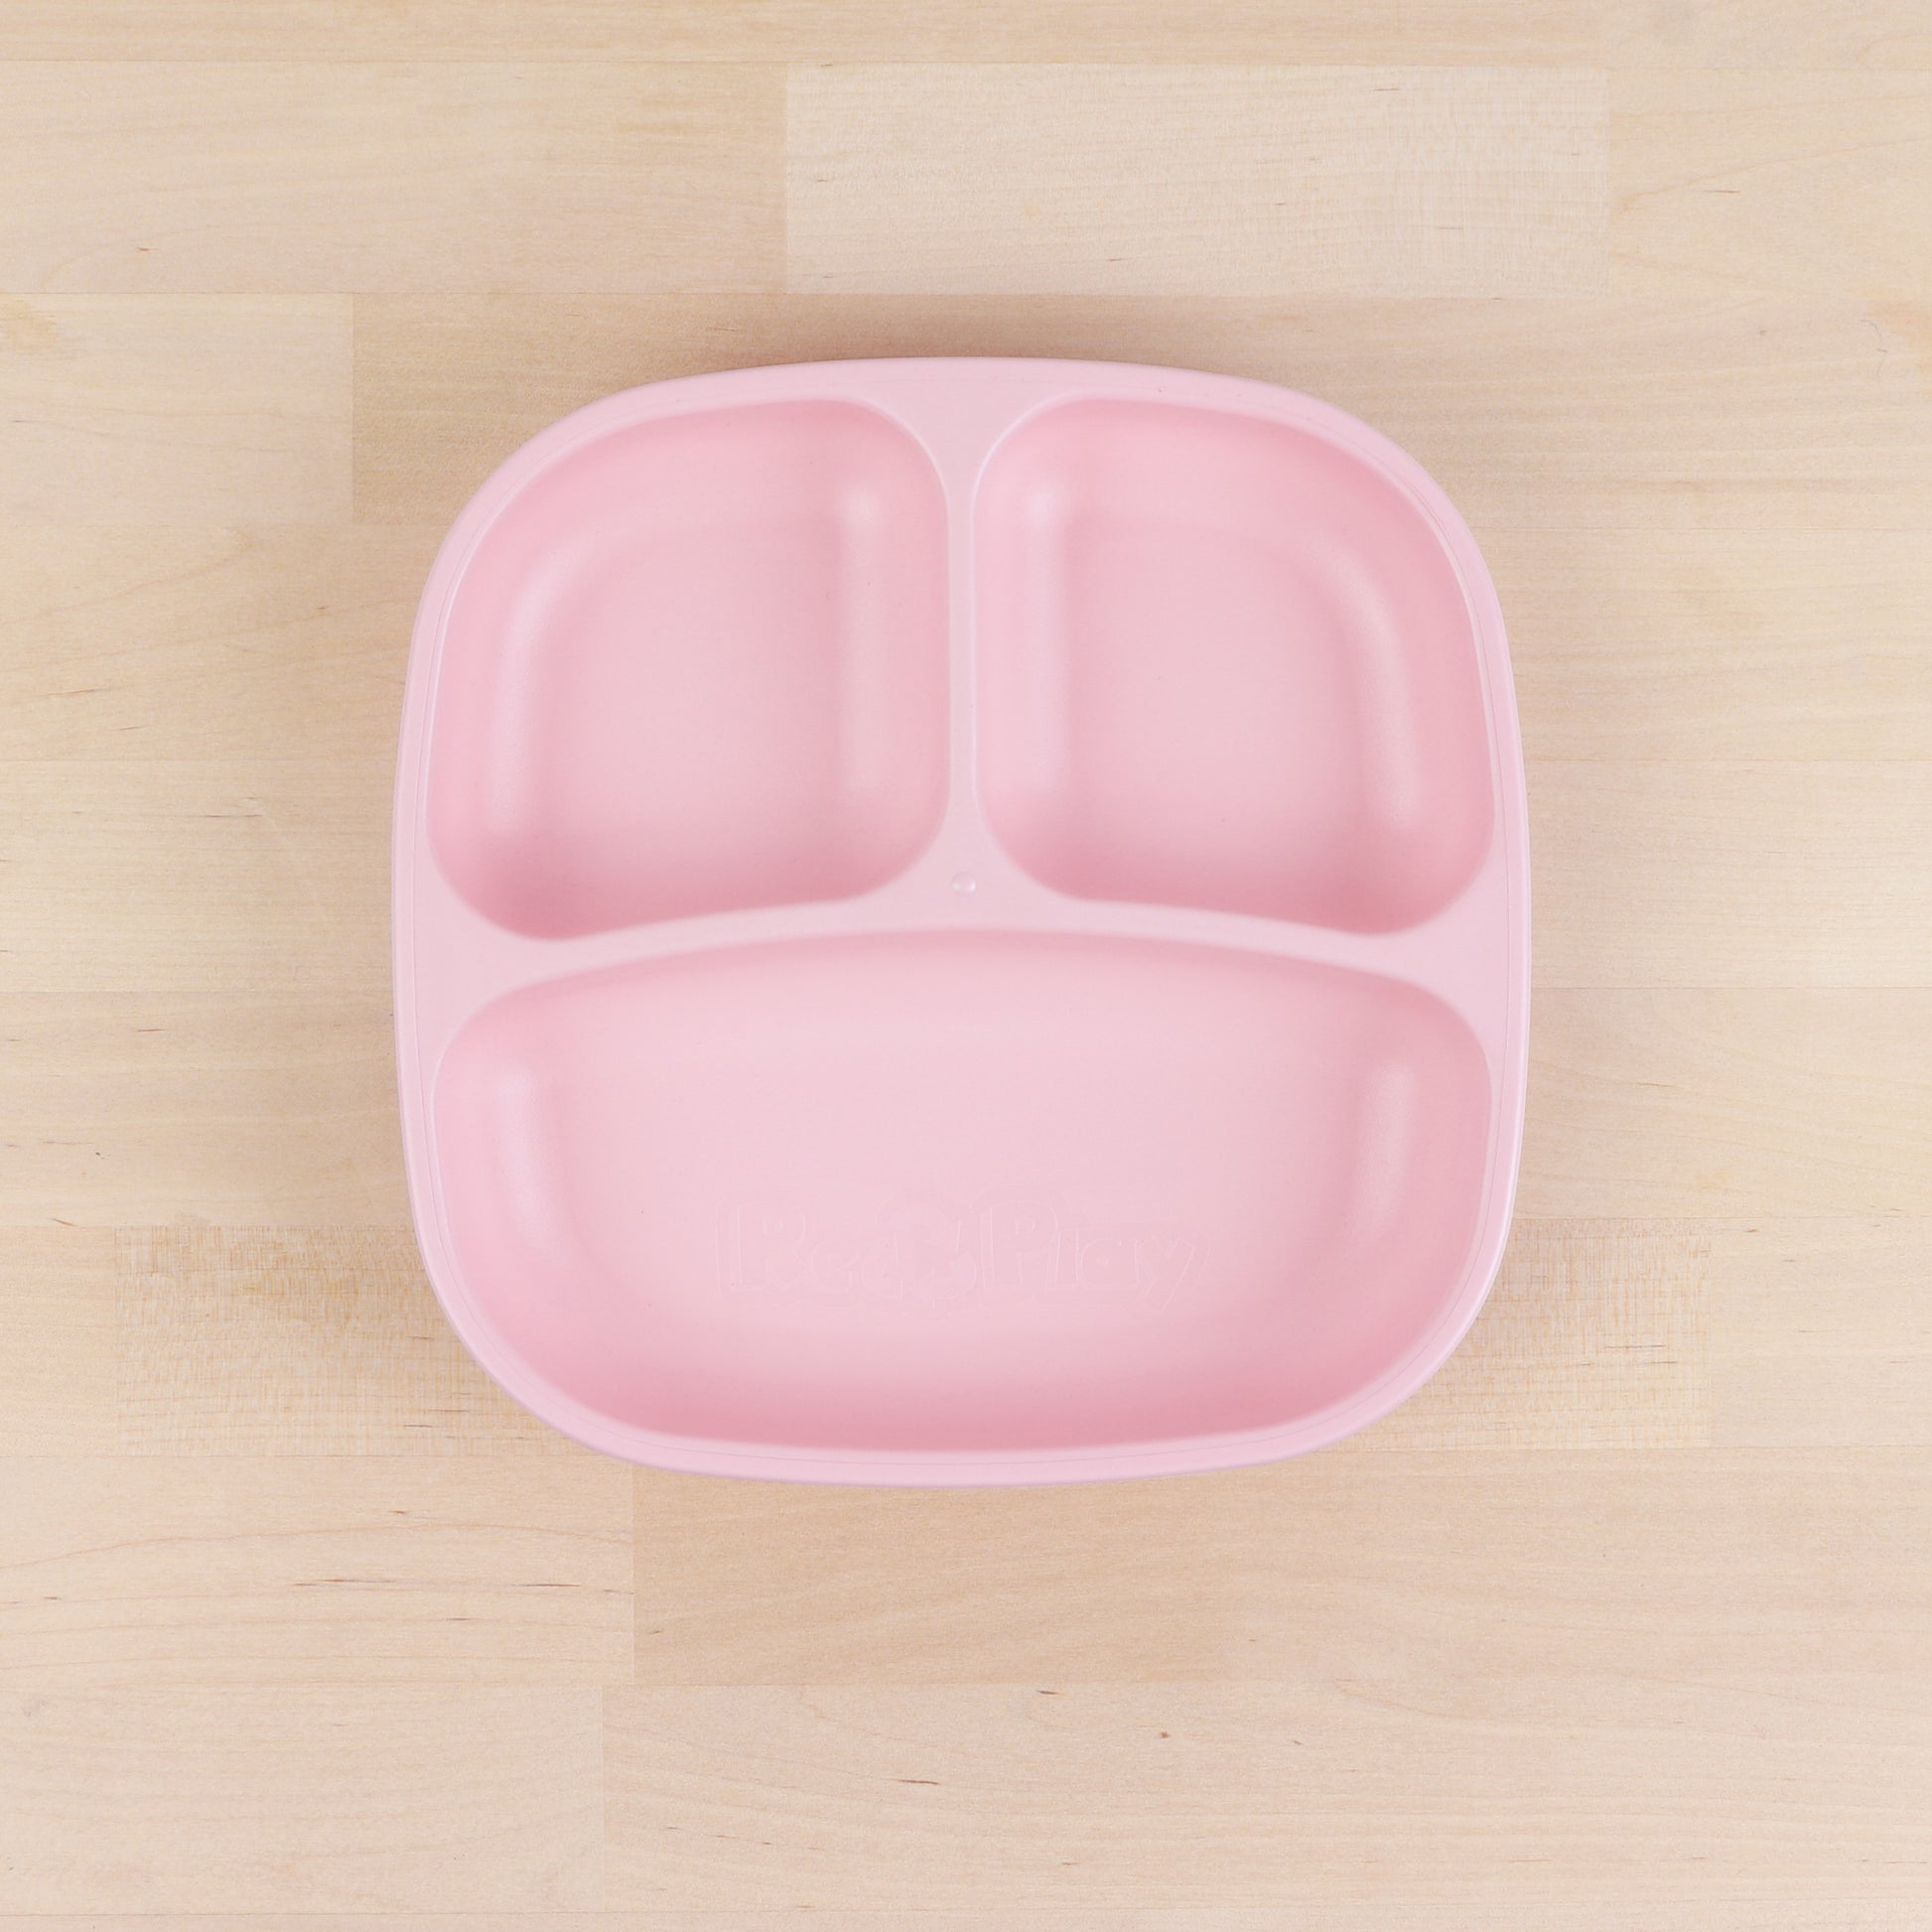 Re-Play Divided Plate 7" plate in Ice Pink from Bear & Moo